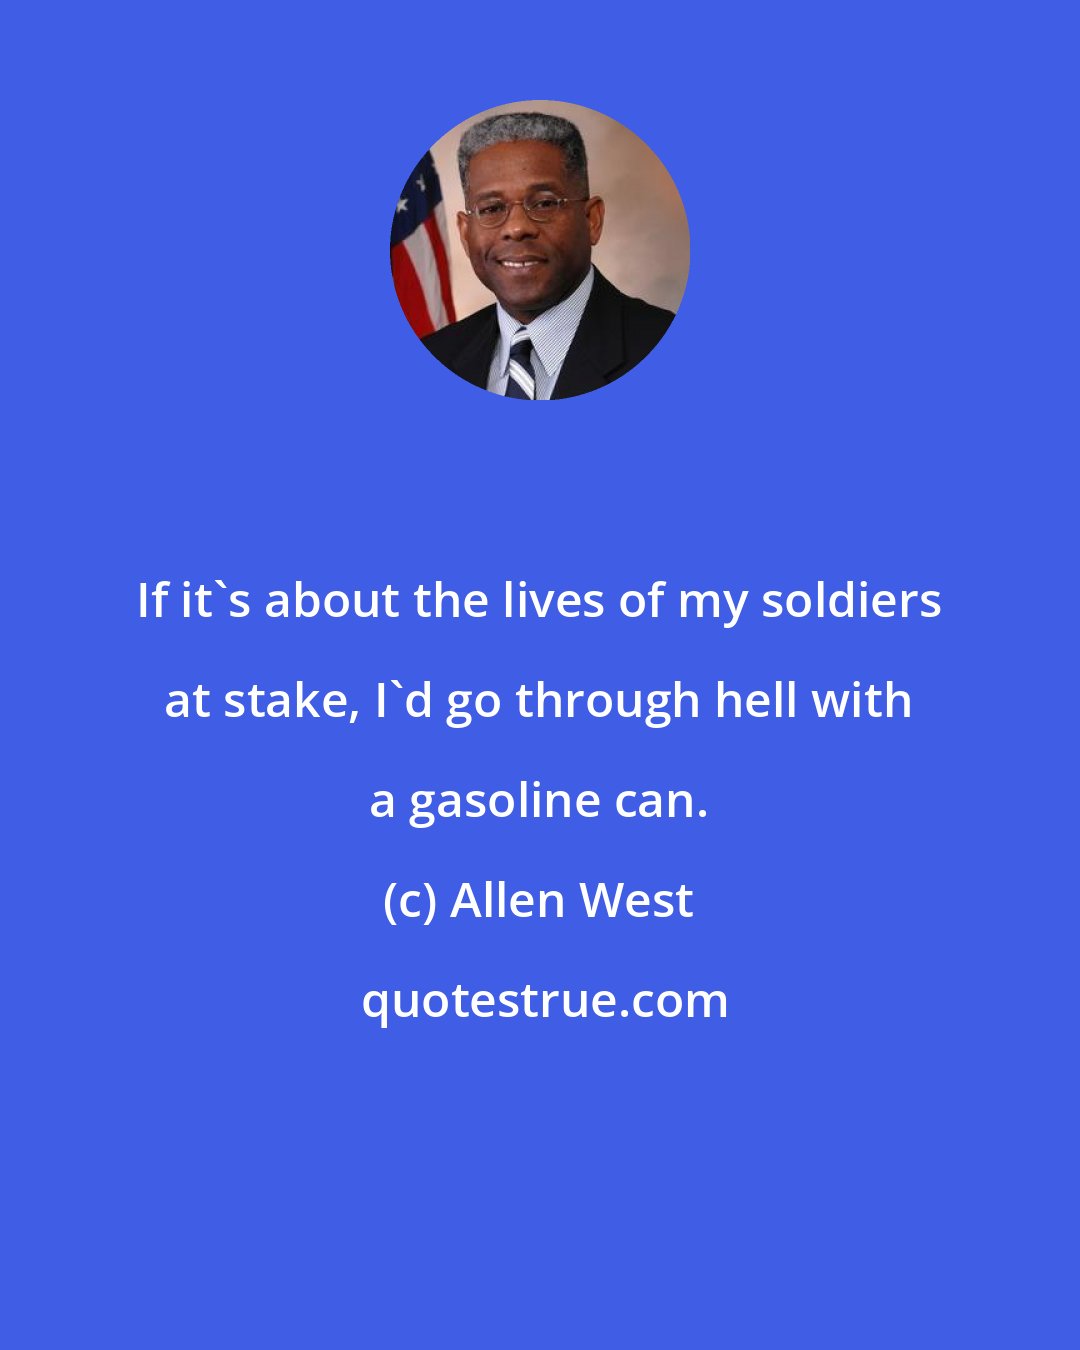 Allen West: If it's about the lives of my soldiers at stake, I'd go through hell with a gasoline can.